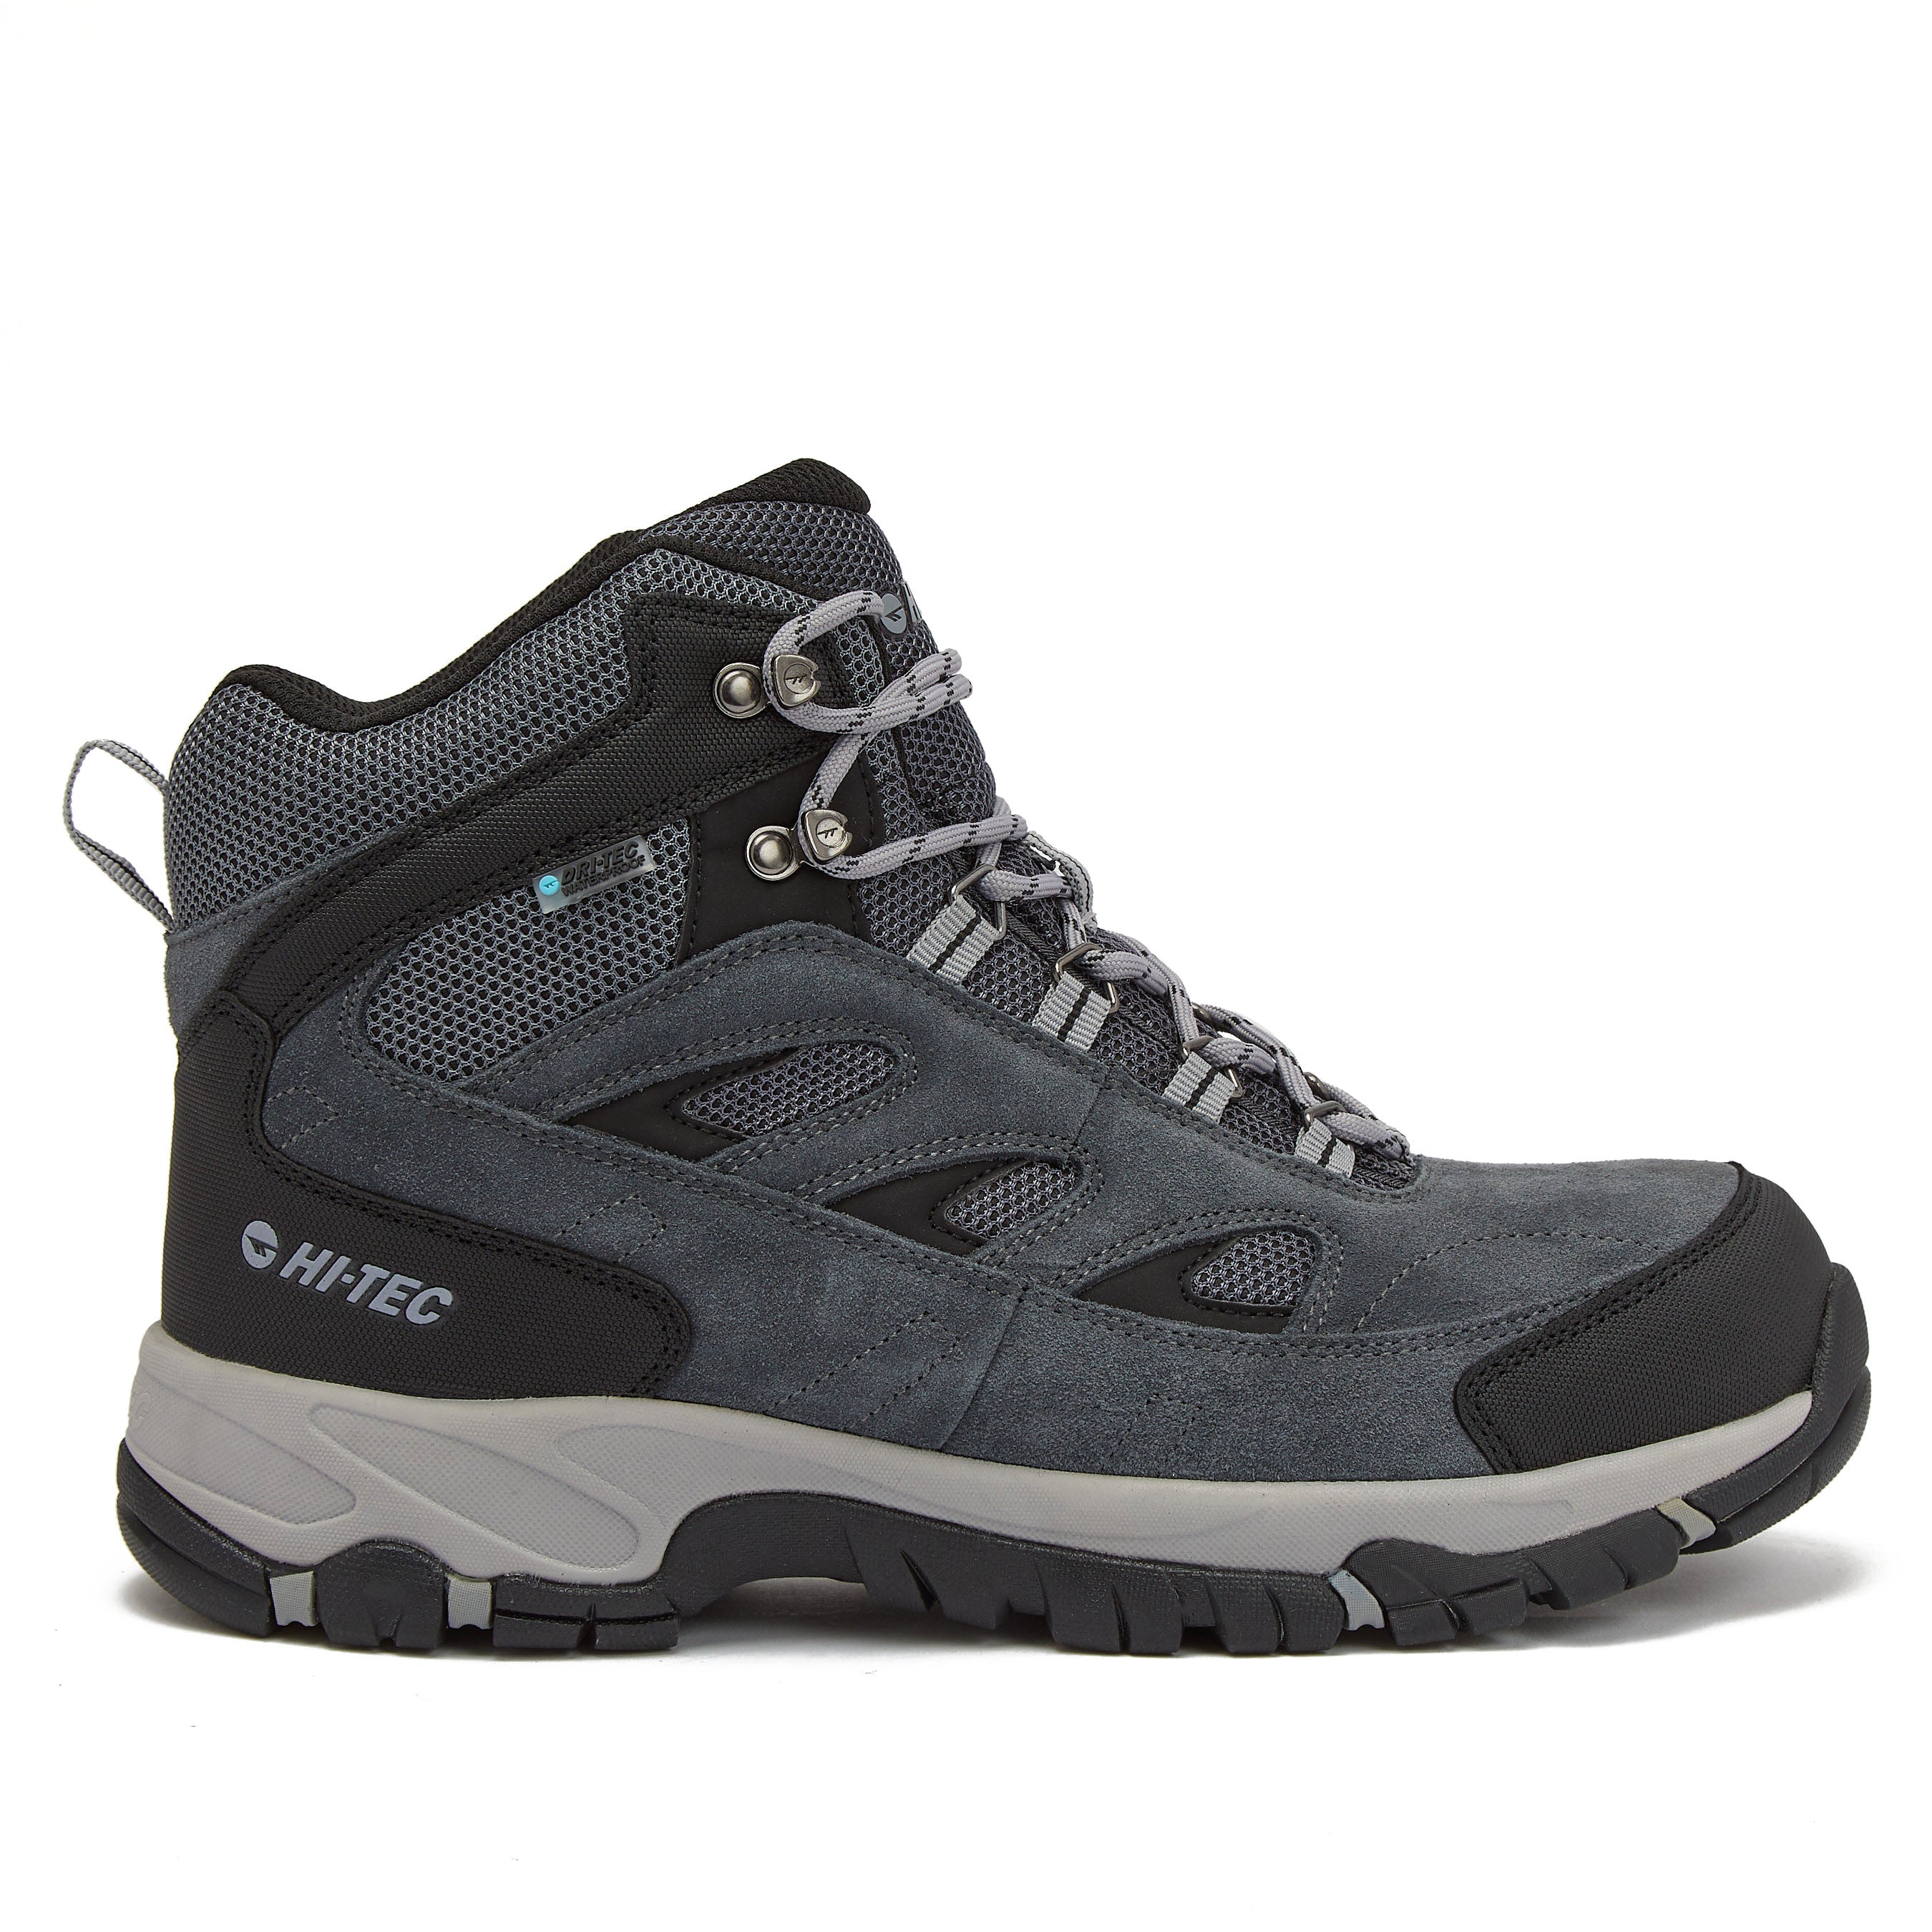 Hi-Tec Hiking Boots & Trail for Shoes Women and Men –